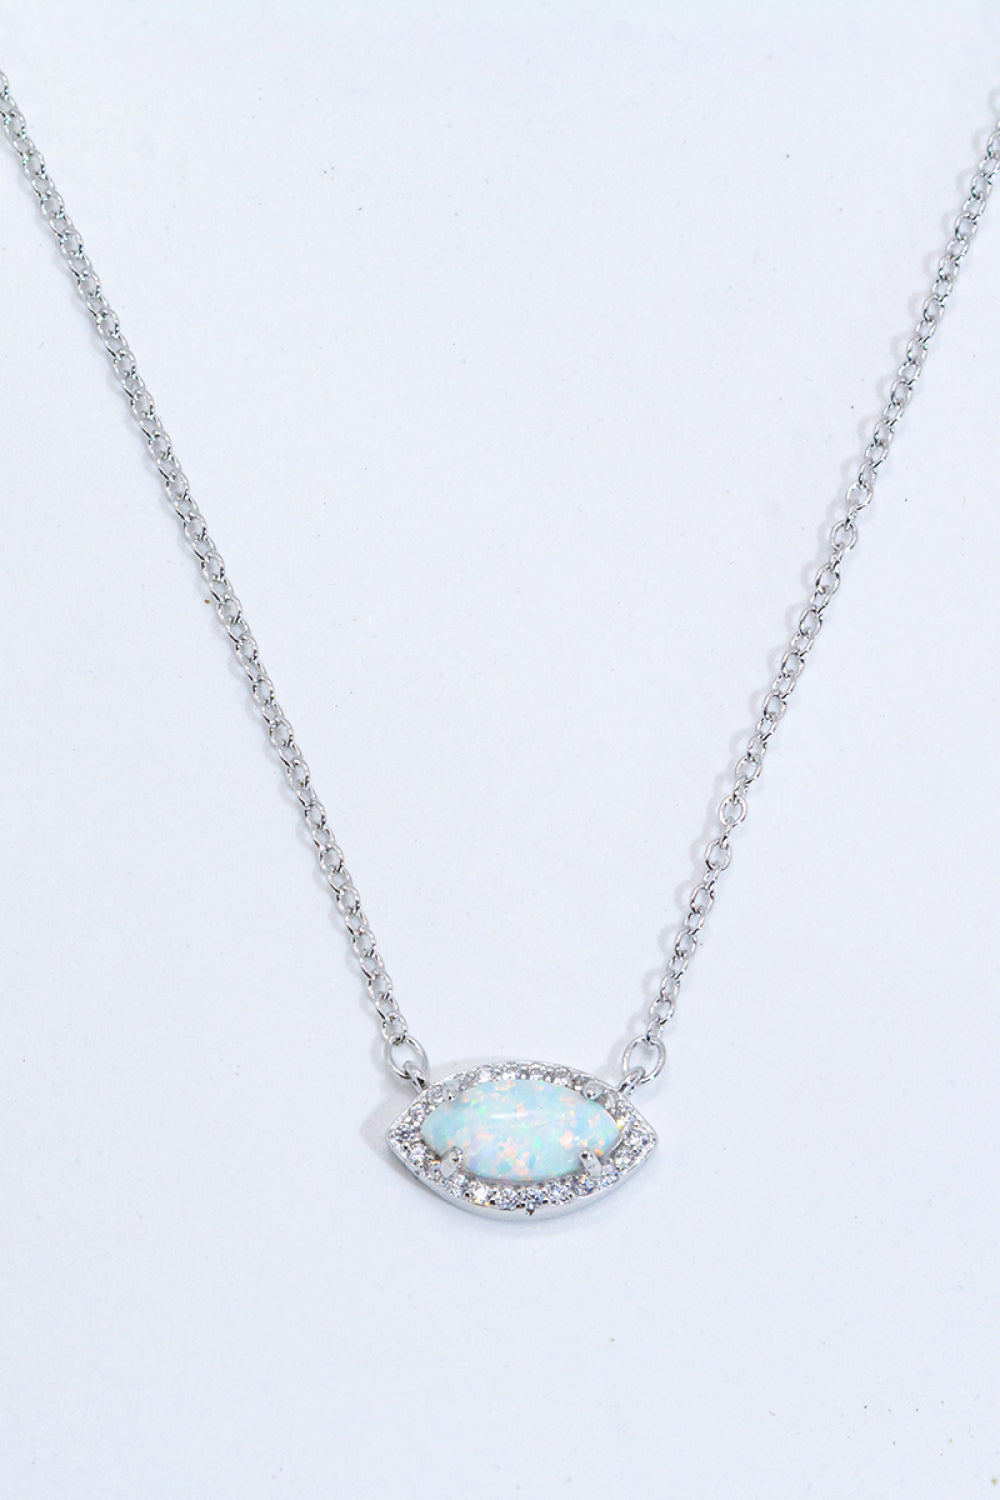 18k Rose Gold-Plated Opal Pendant Necklace